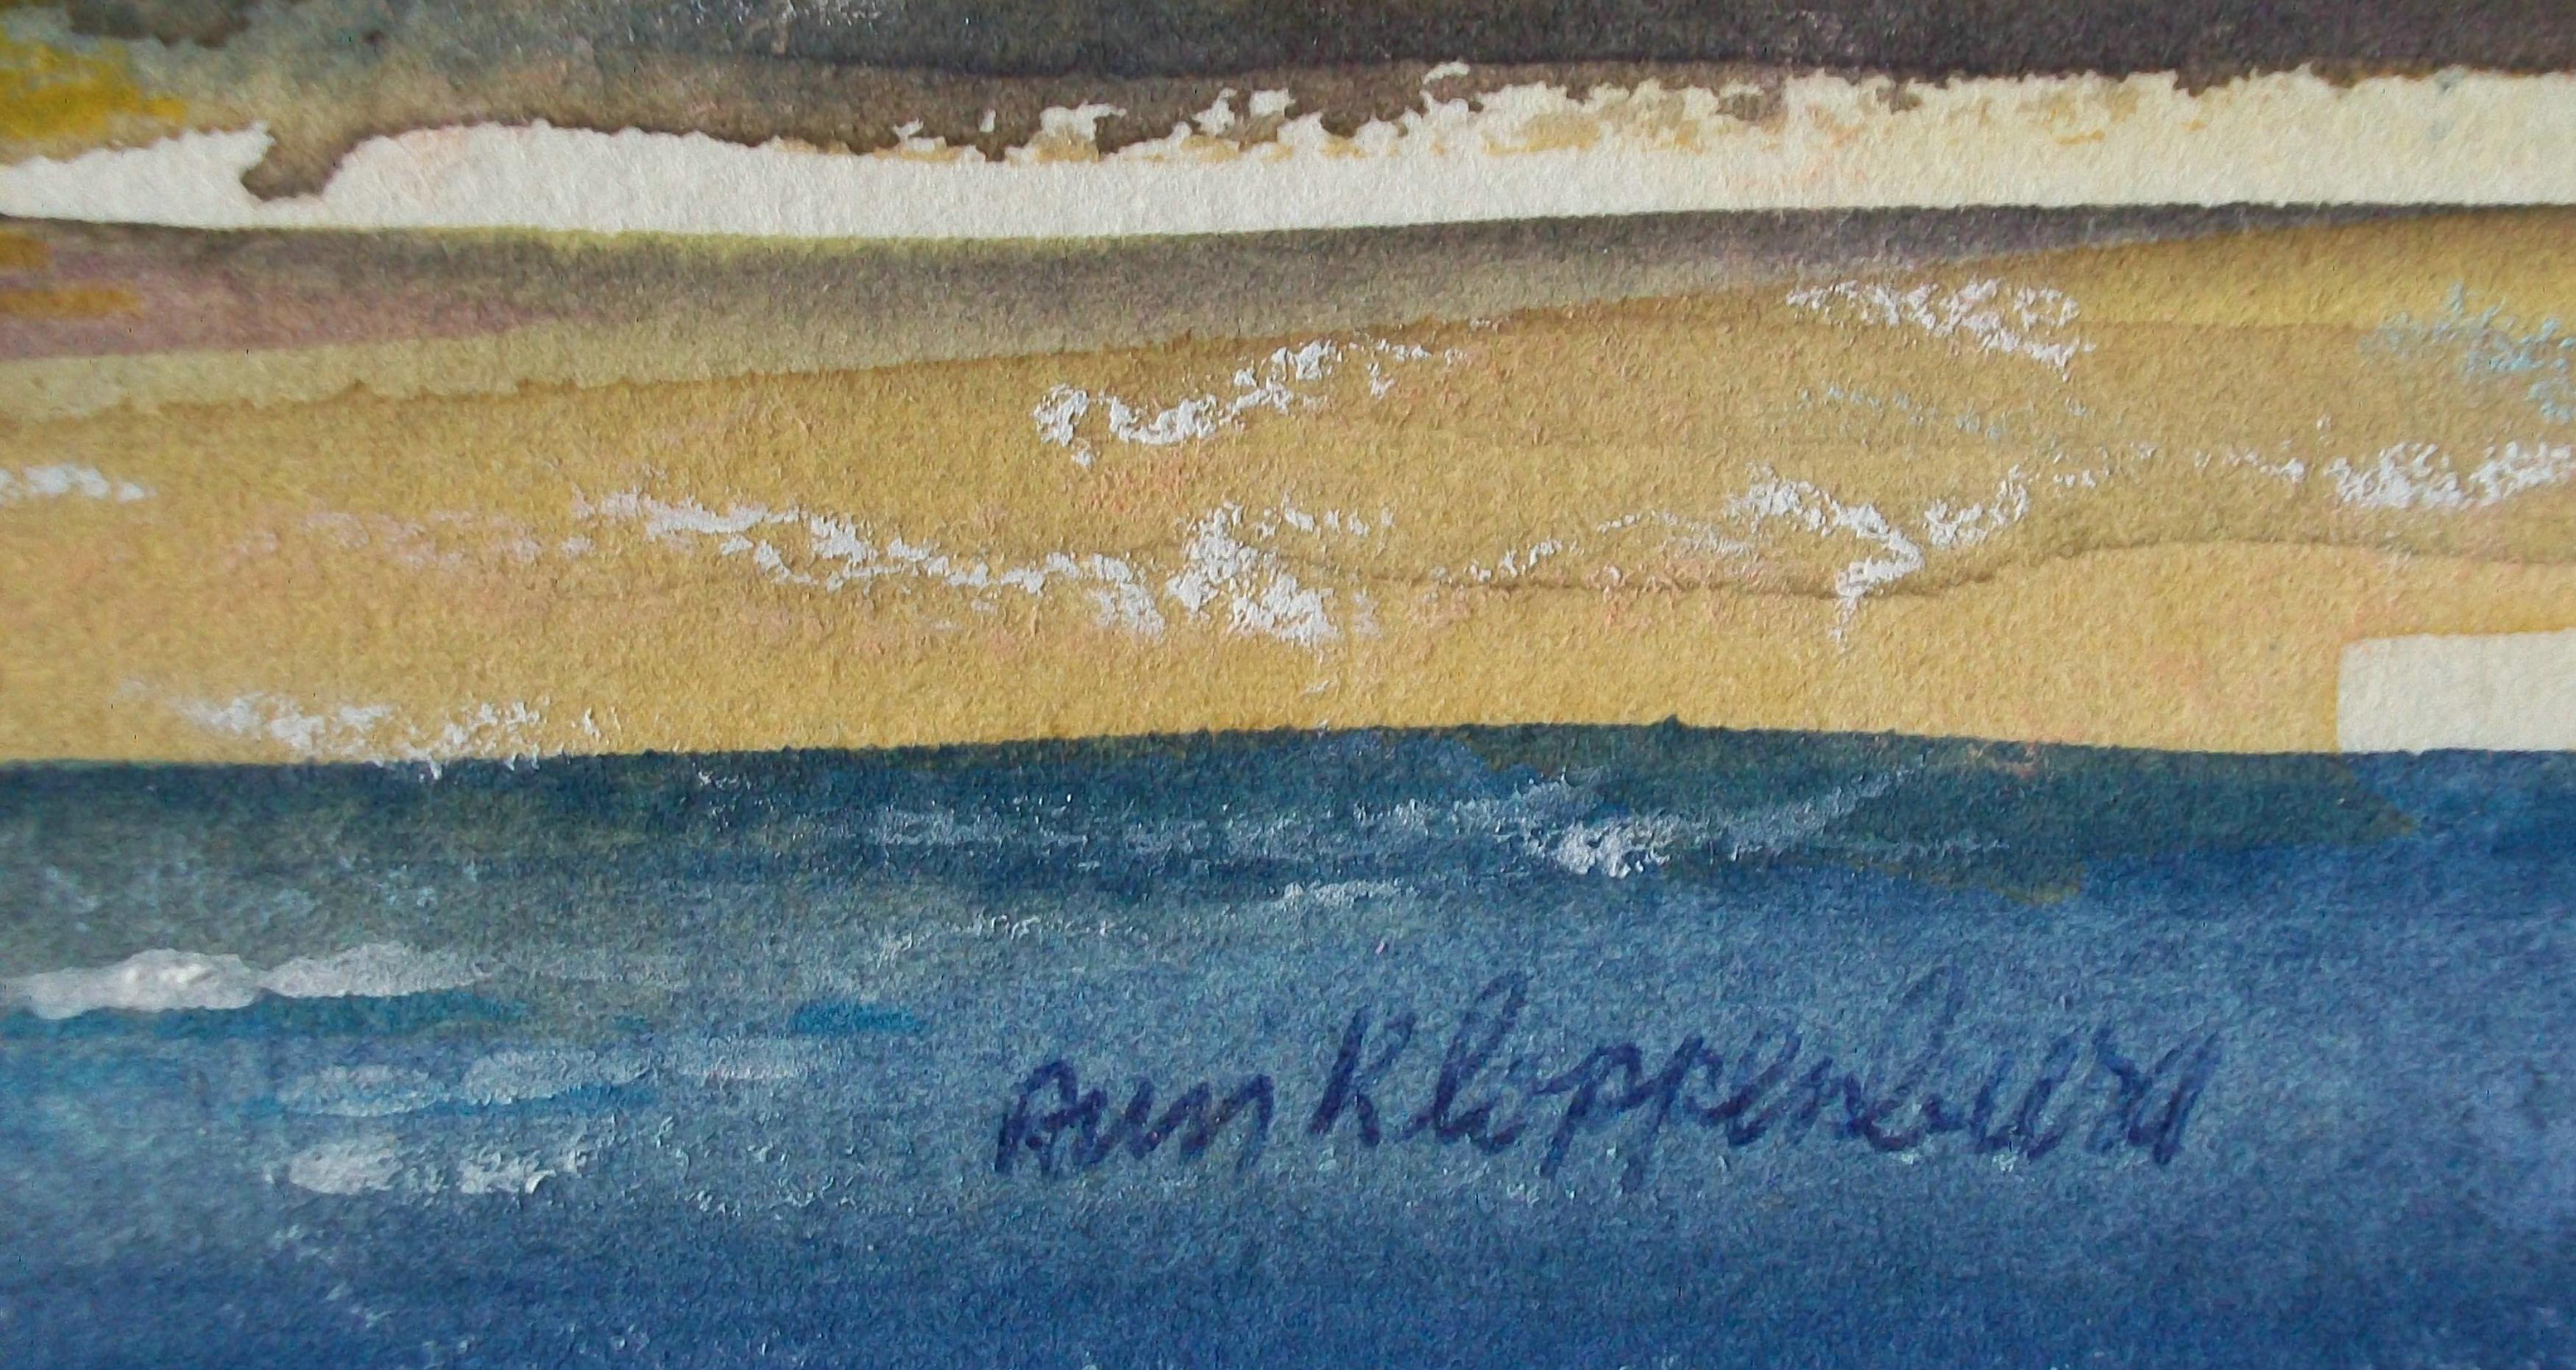 Canadian ANN KLOPPENBURG - 'Mullaghmore Beach' - Watercolor Painting - Canada - C. 1990's For Sale